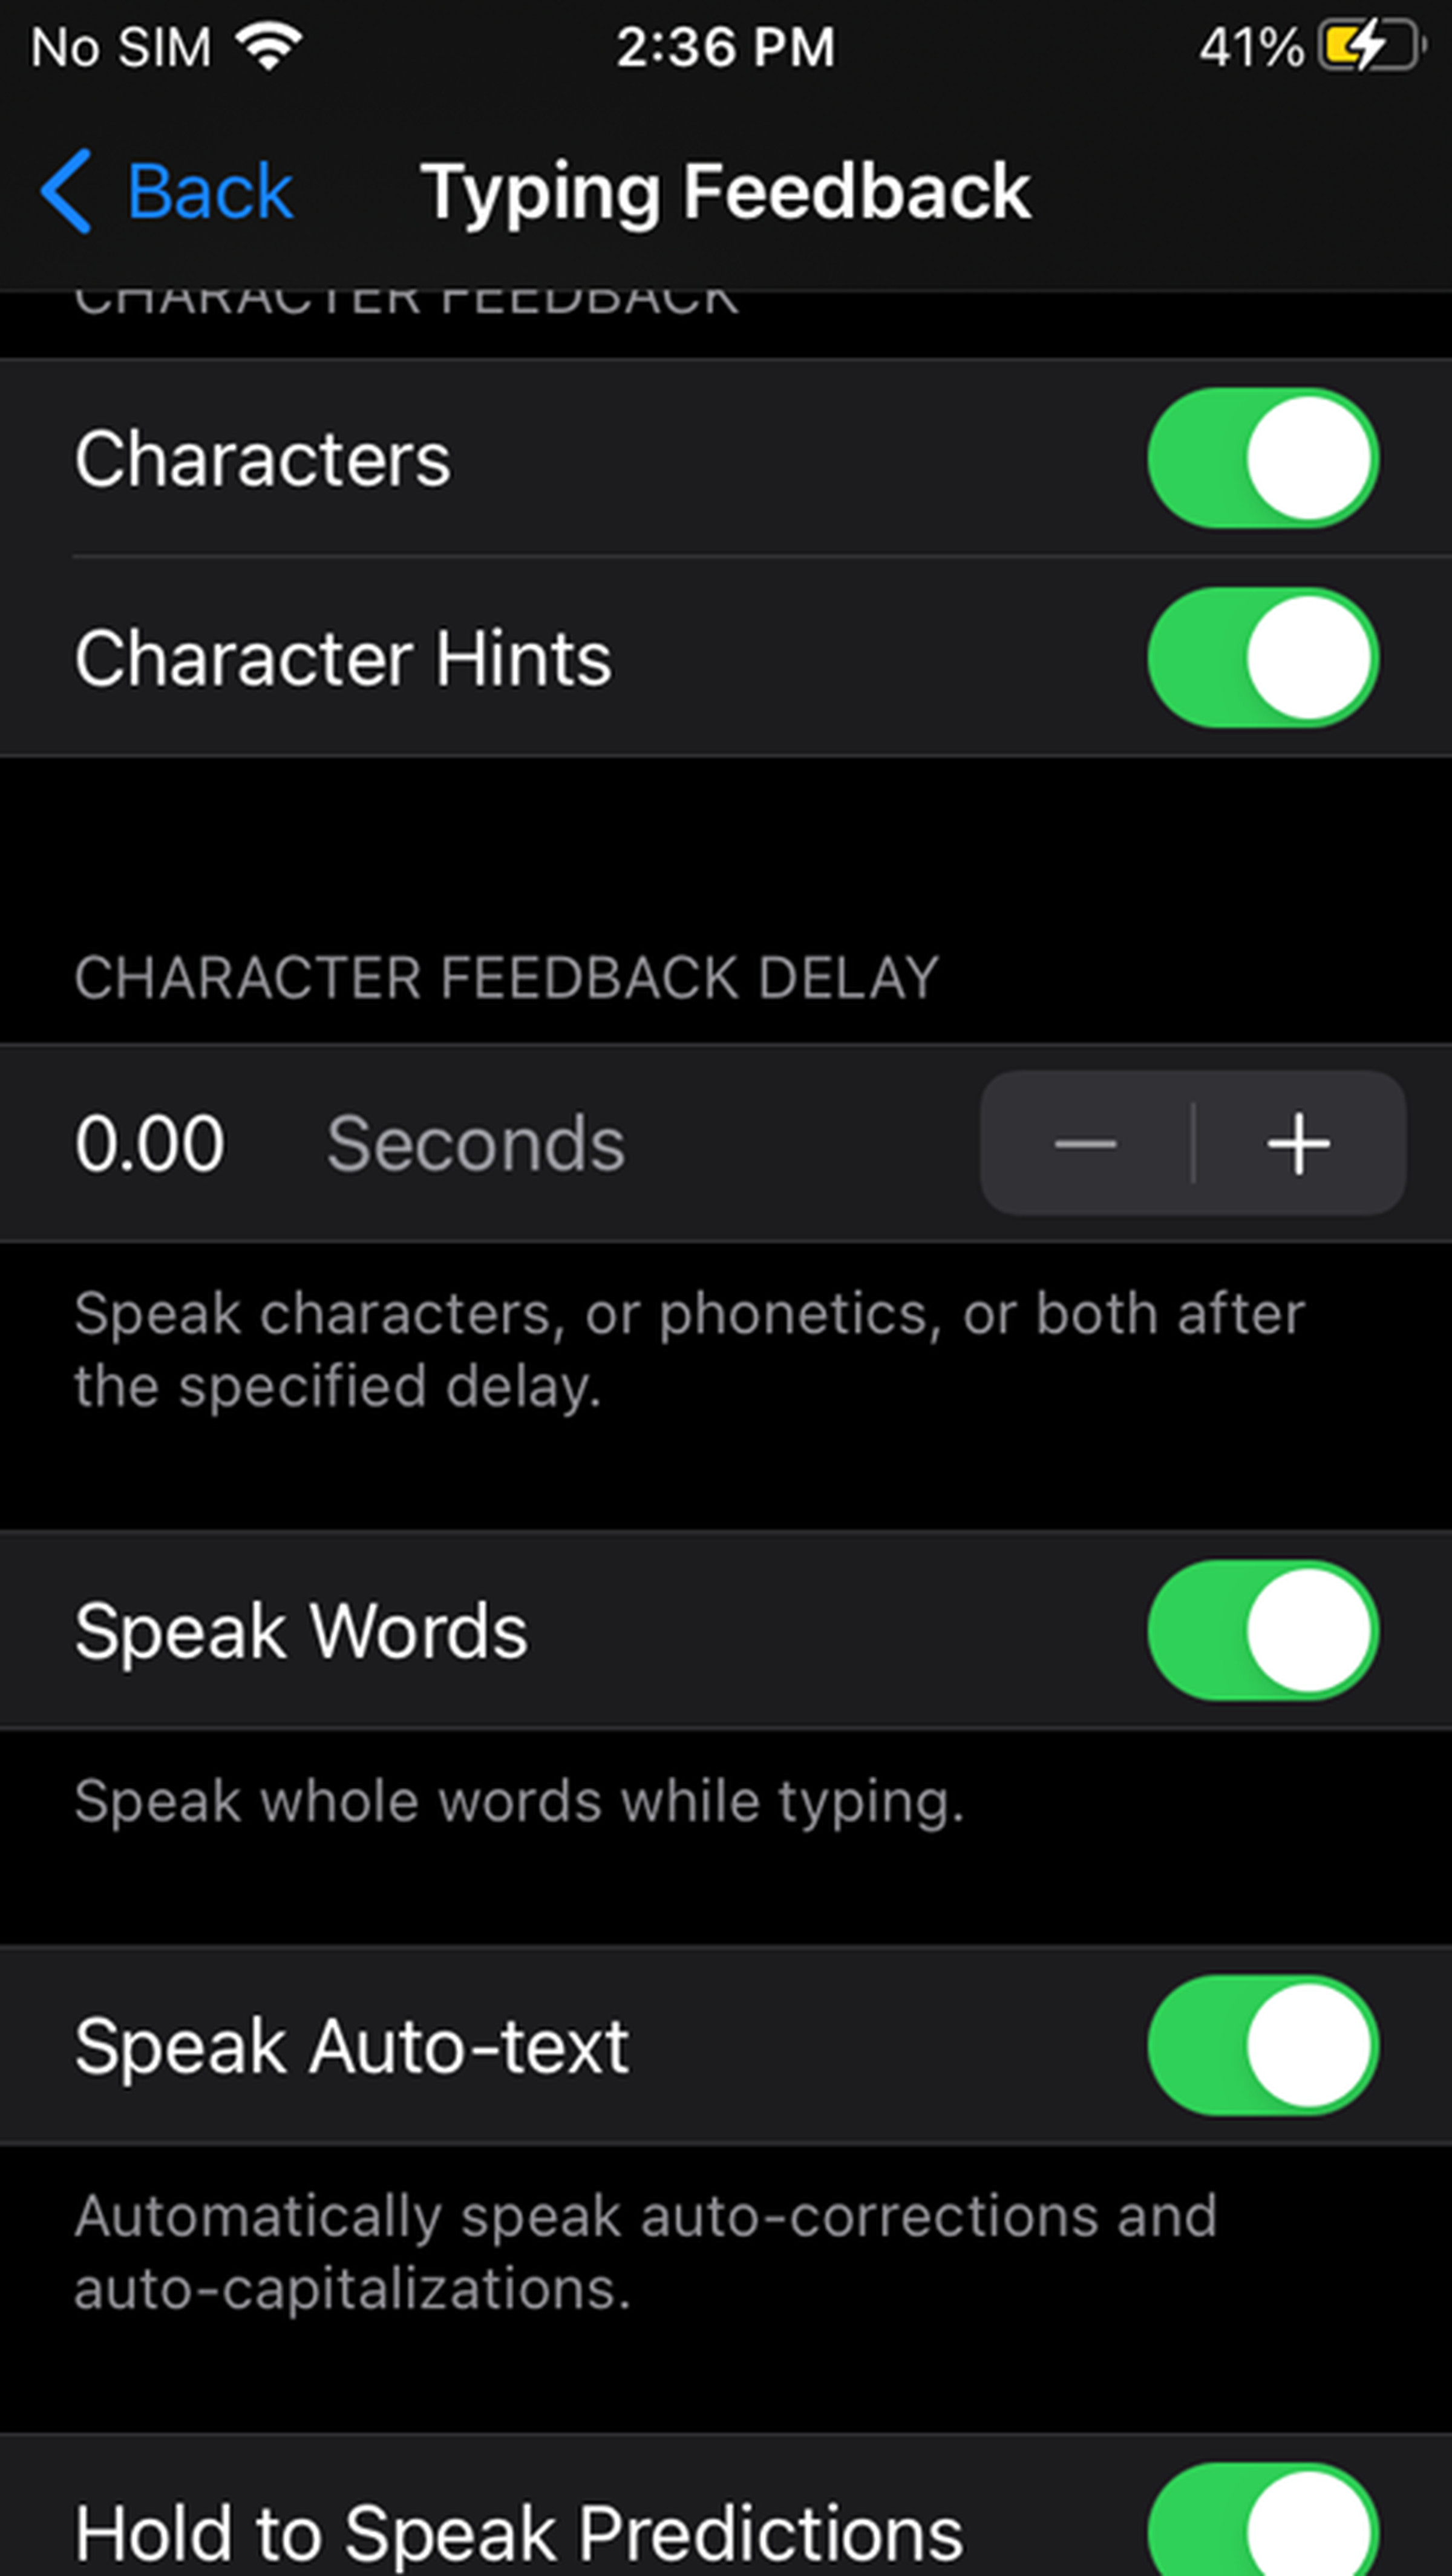 Typing Feedback page on iPhone